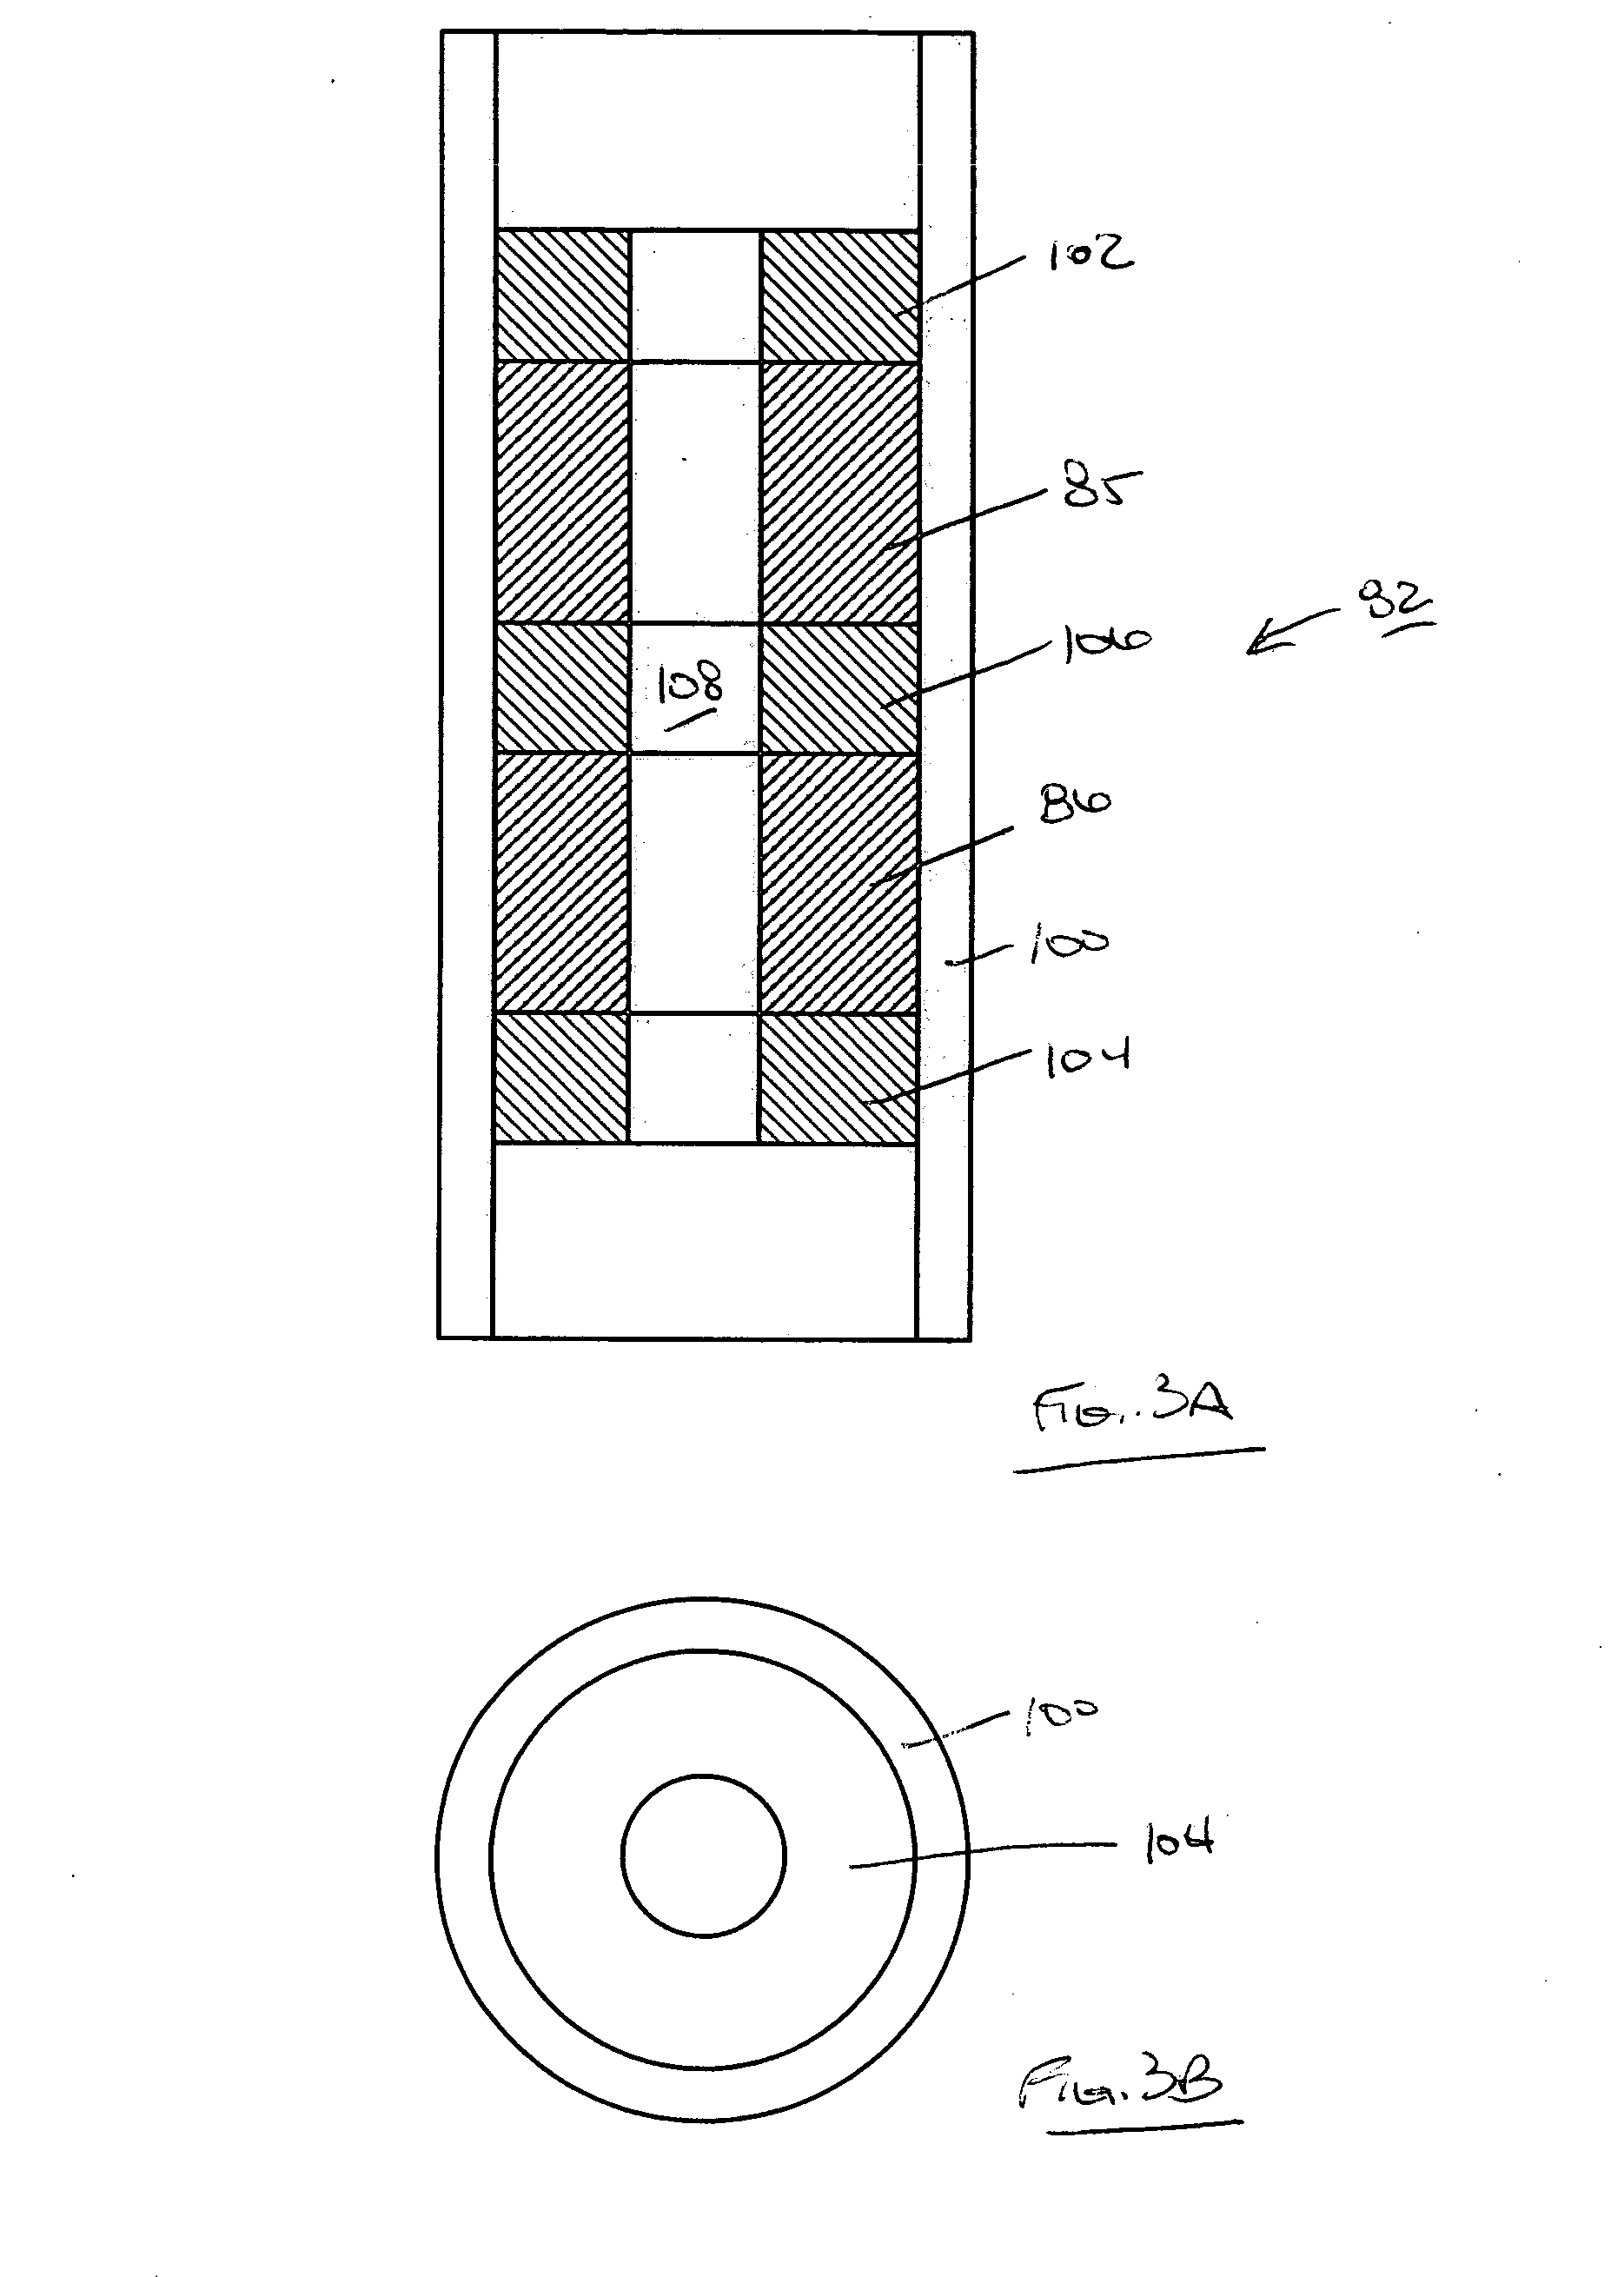 Method of and apparatus for converting biological materials into energy resources